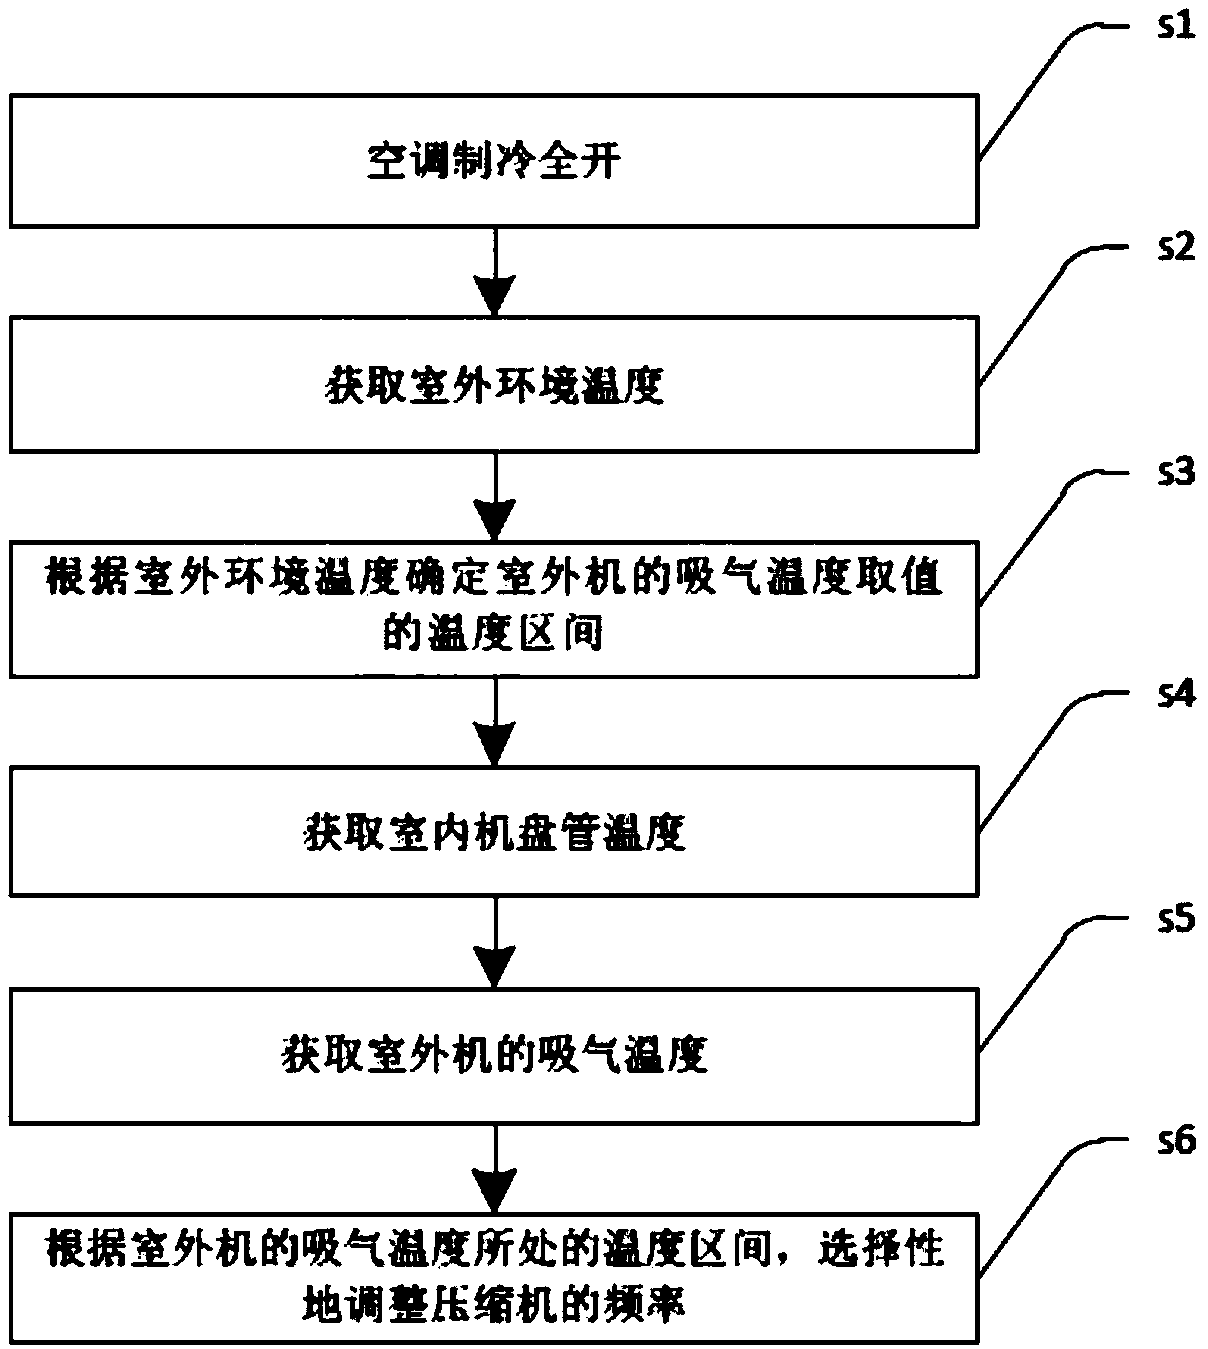 Control method for air conditioner